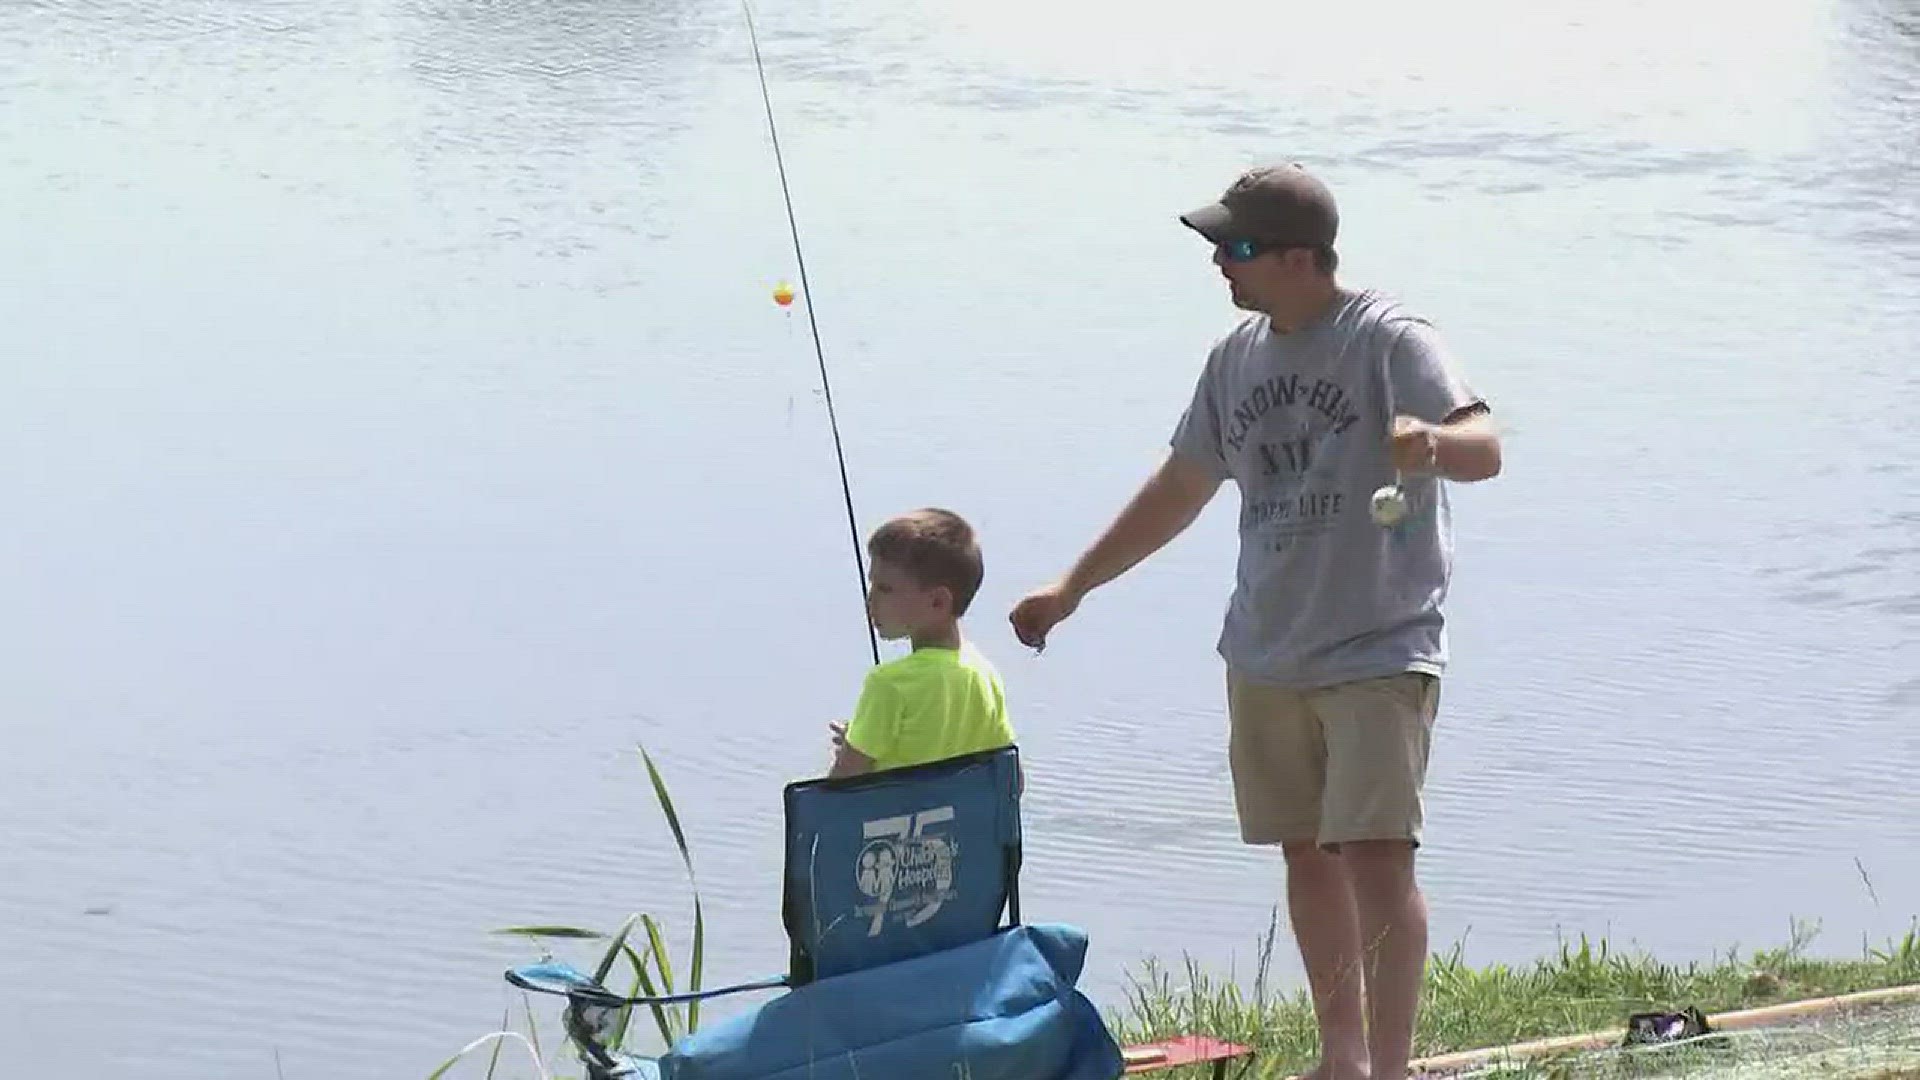 Free Fishing DaySaturday, June 9 TWRA Will host an event at The Cove at Concord Park from 8 a.m. to noon. June 4, 2018-4pm